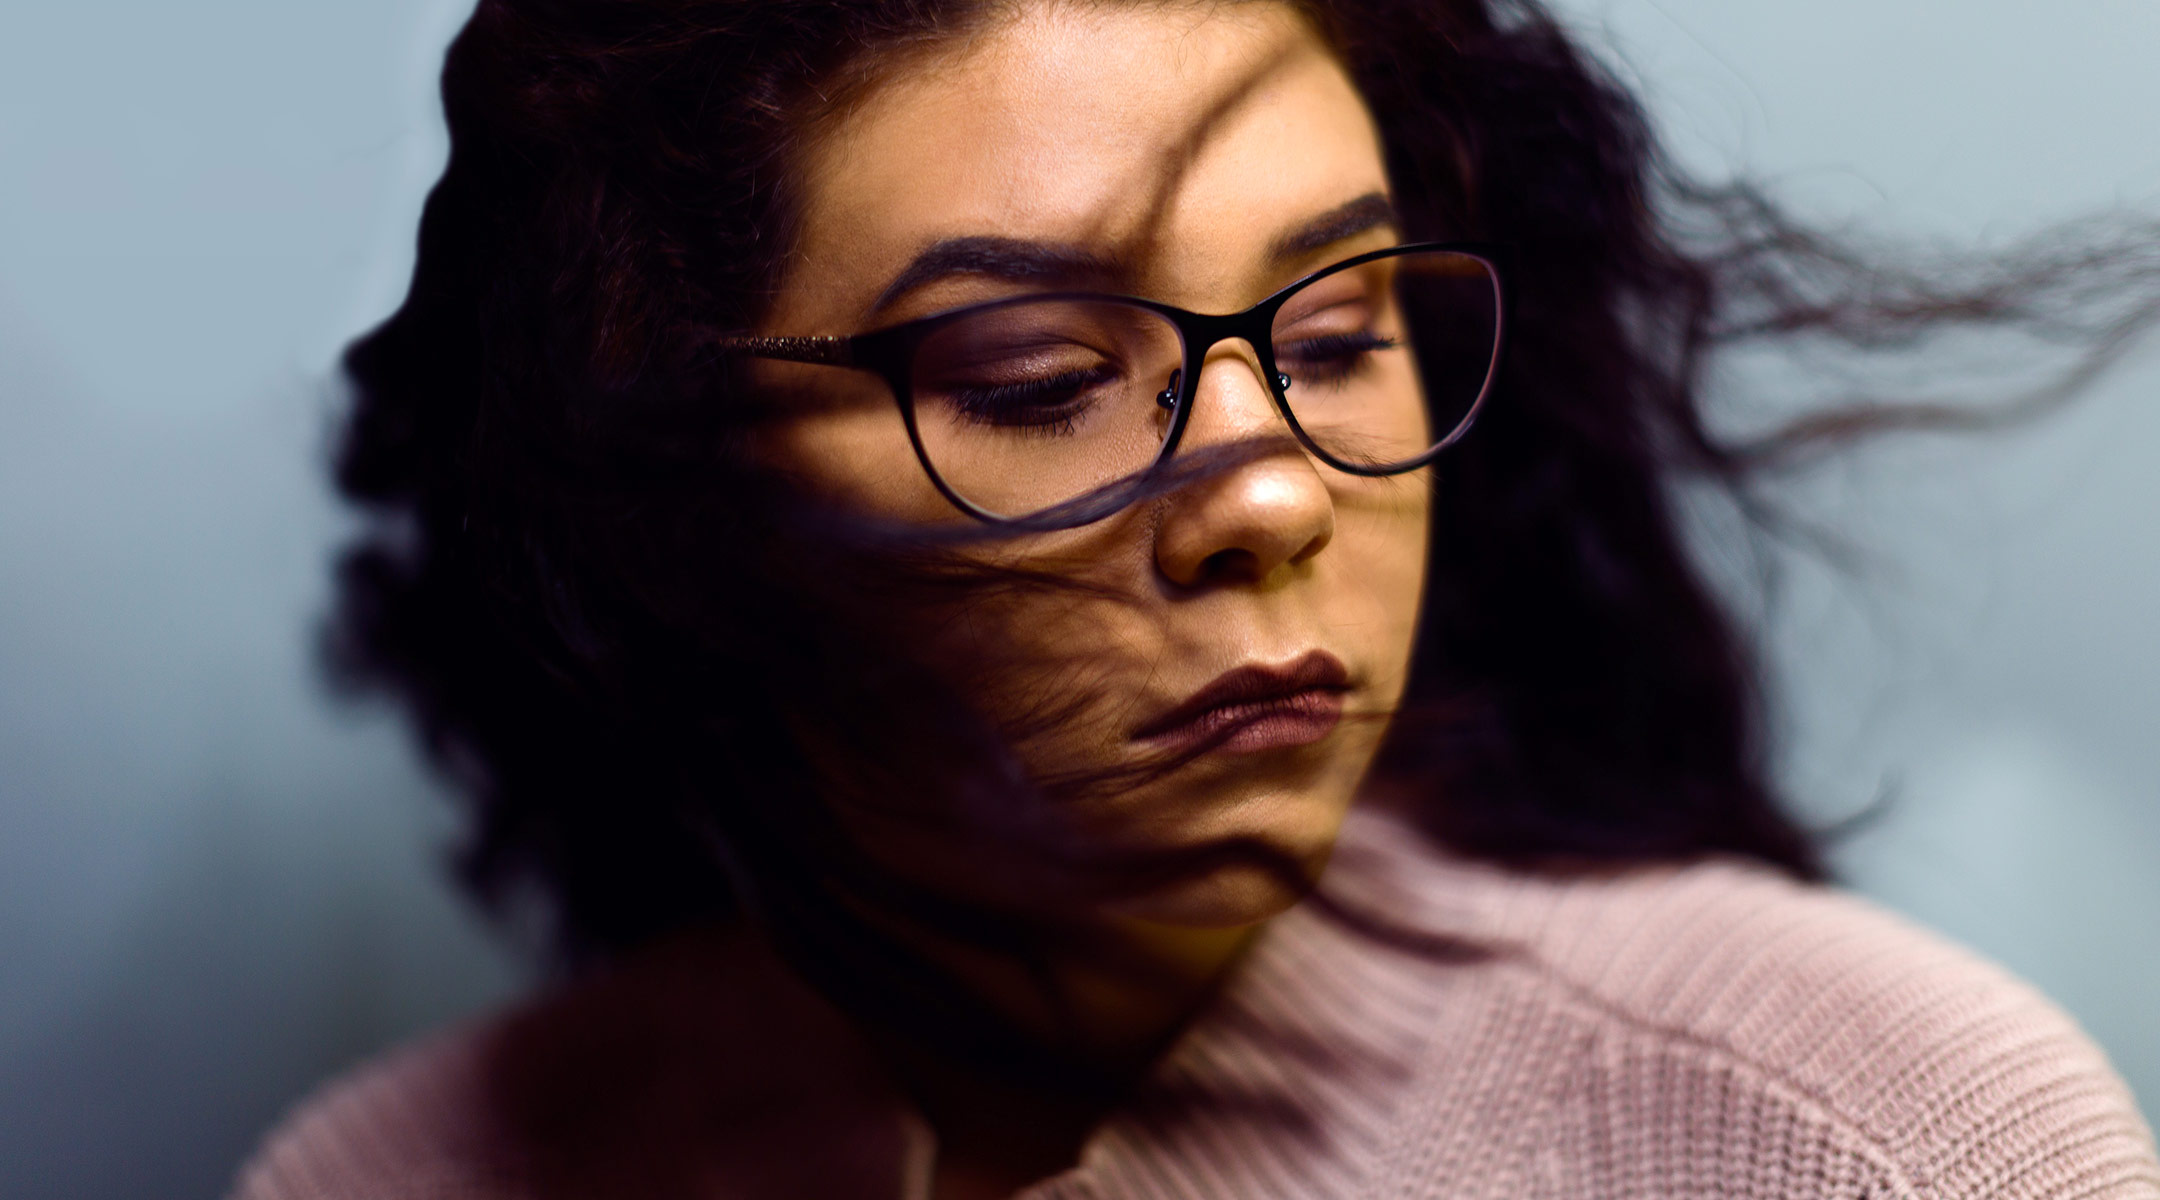 close-up of sad woman with glasses